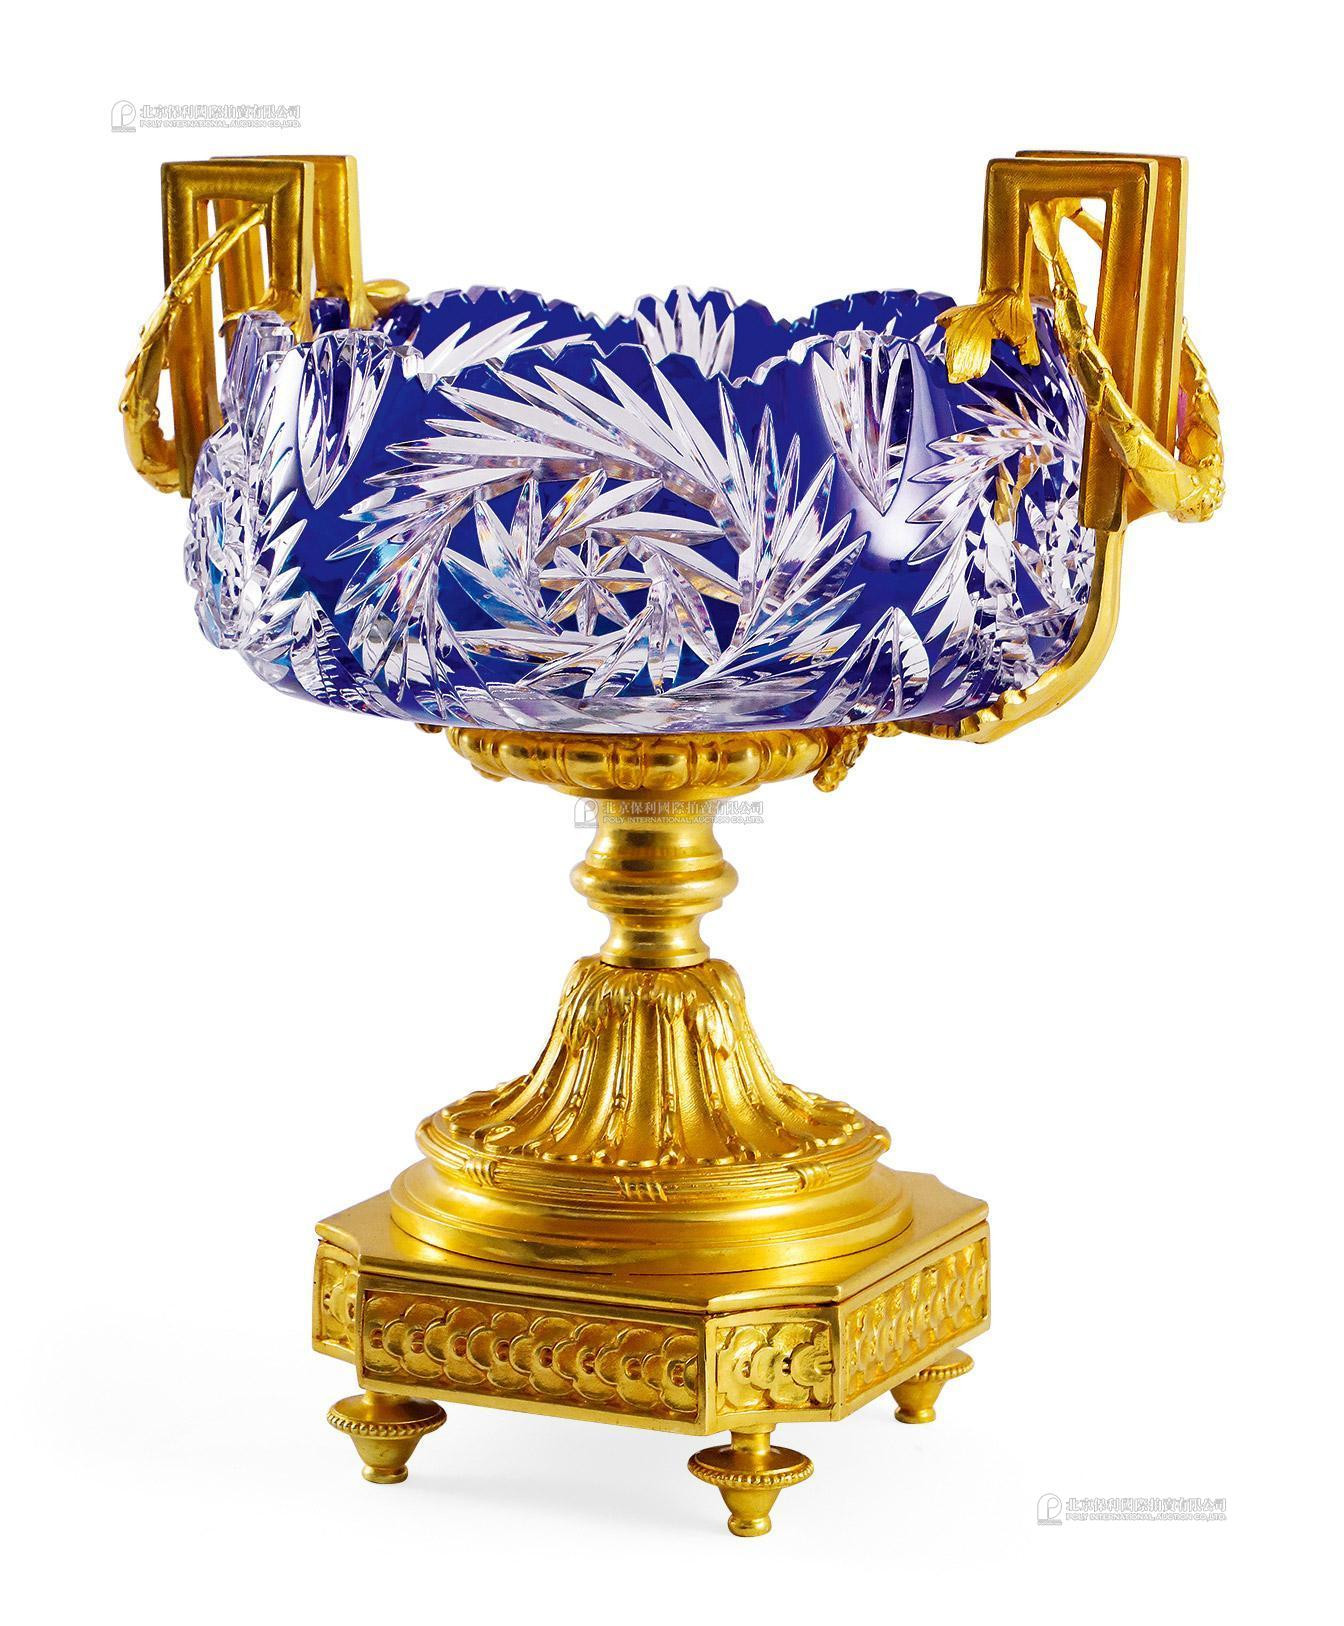 A FRENCH LOUIS XVI STYLE GILT BRONZE AND BLUE CRYSTAL DECORATIVE URN